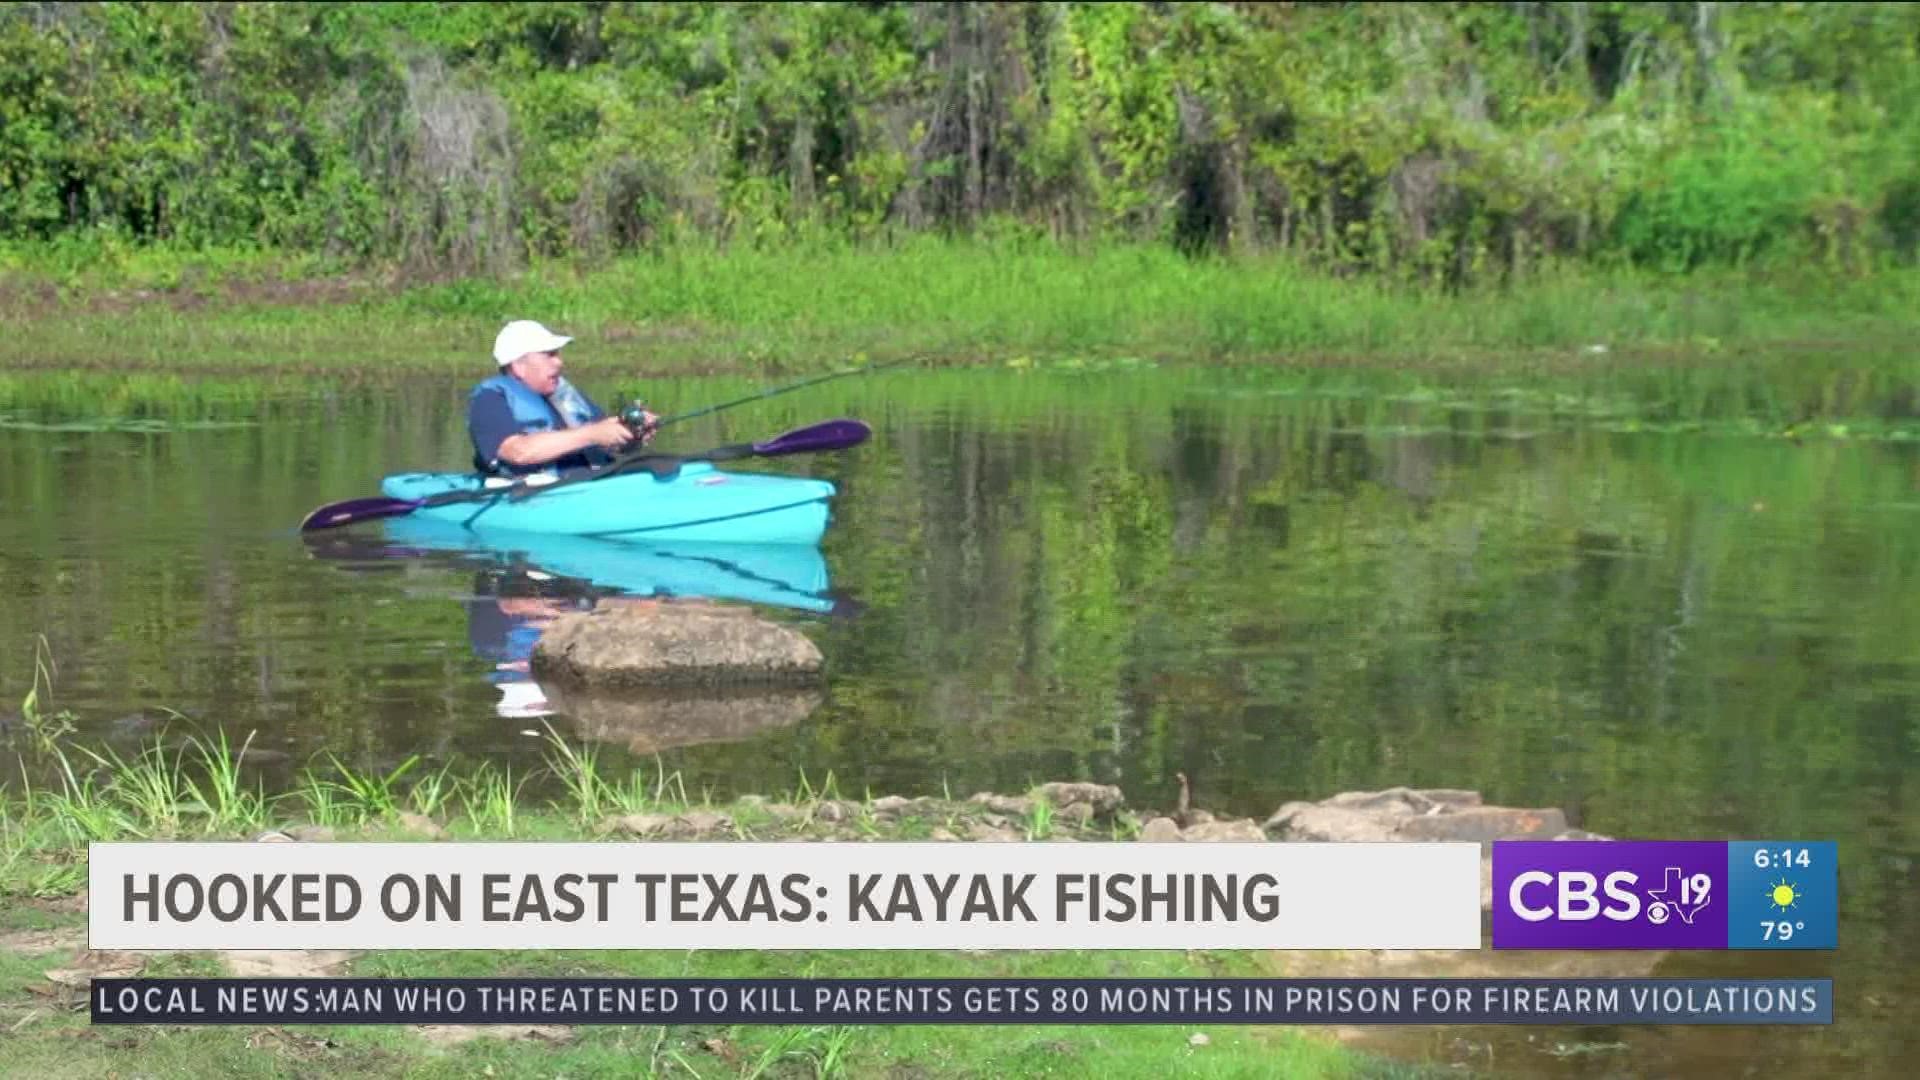 For more Hooked On East Texas stories visit cbs19.tv